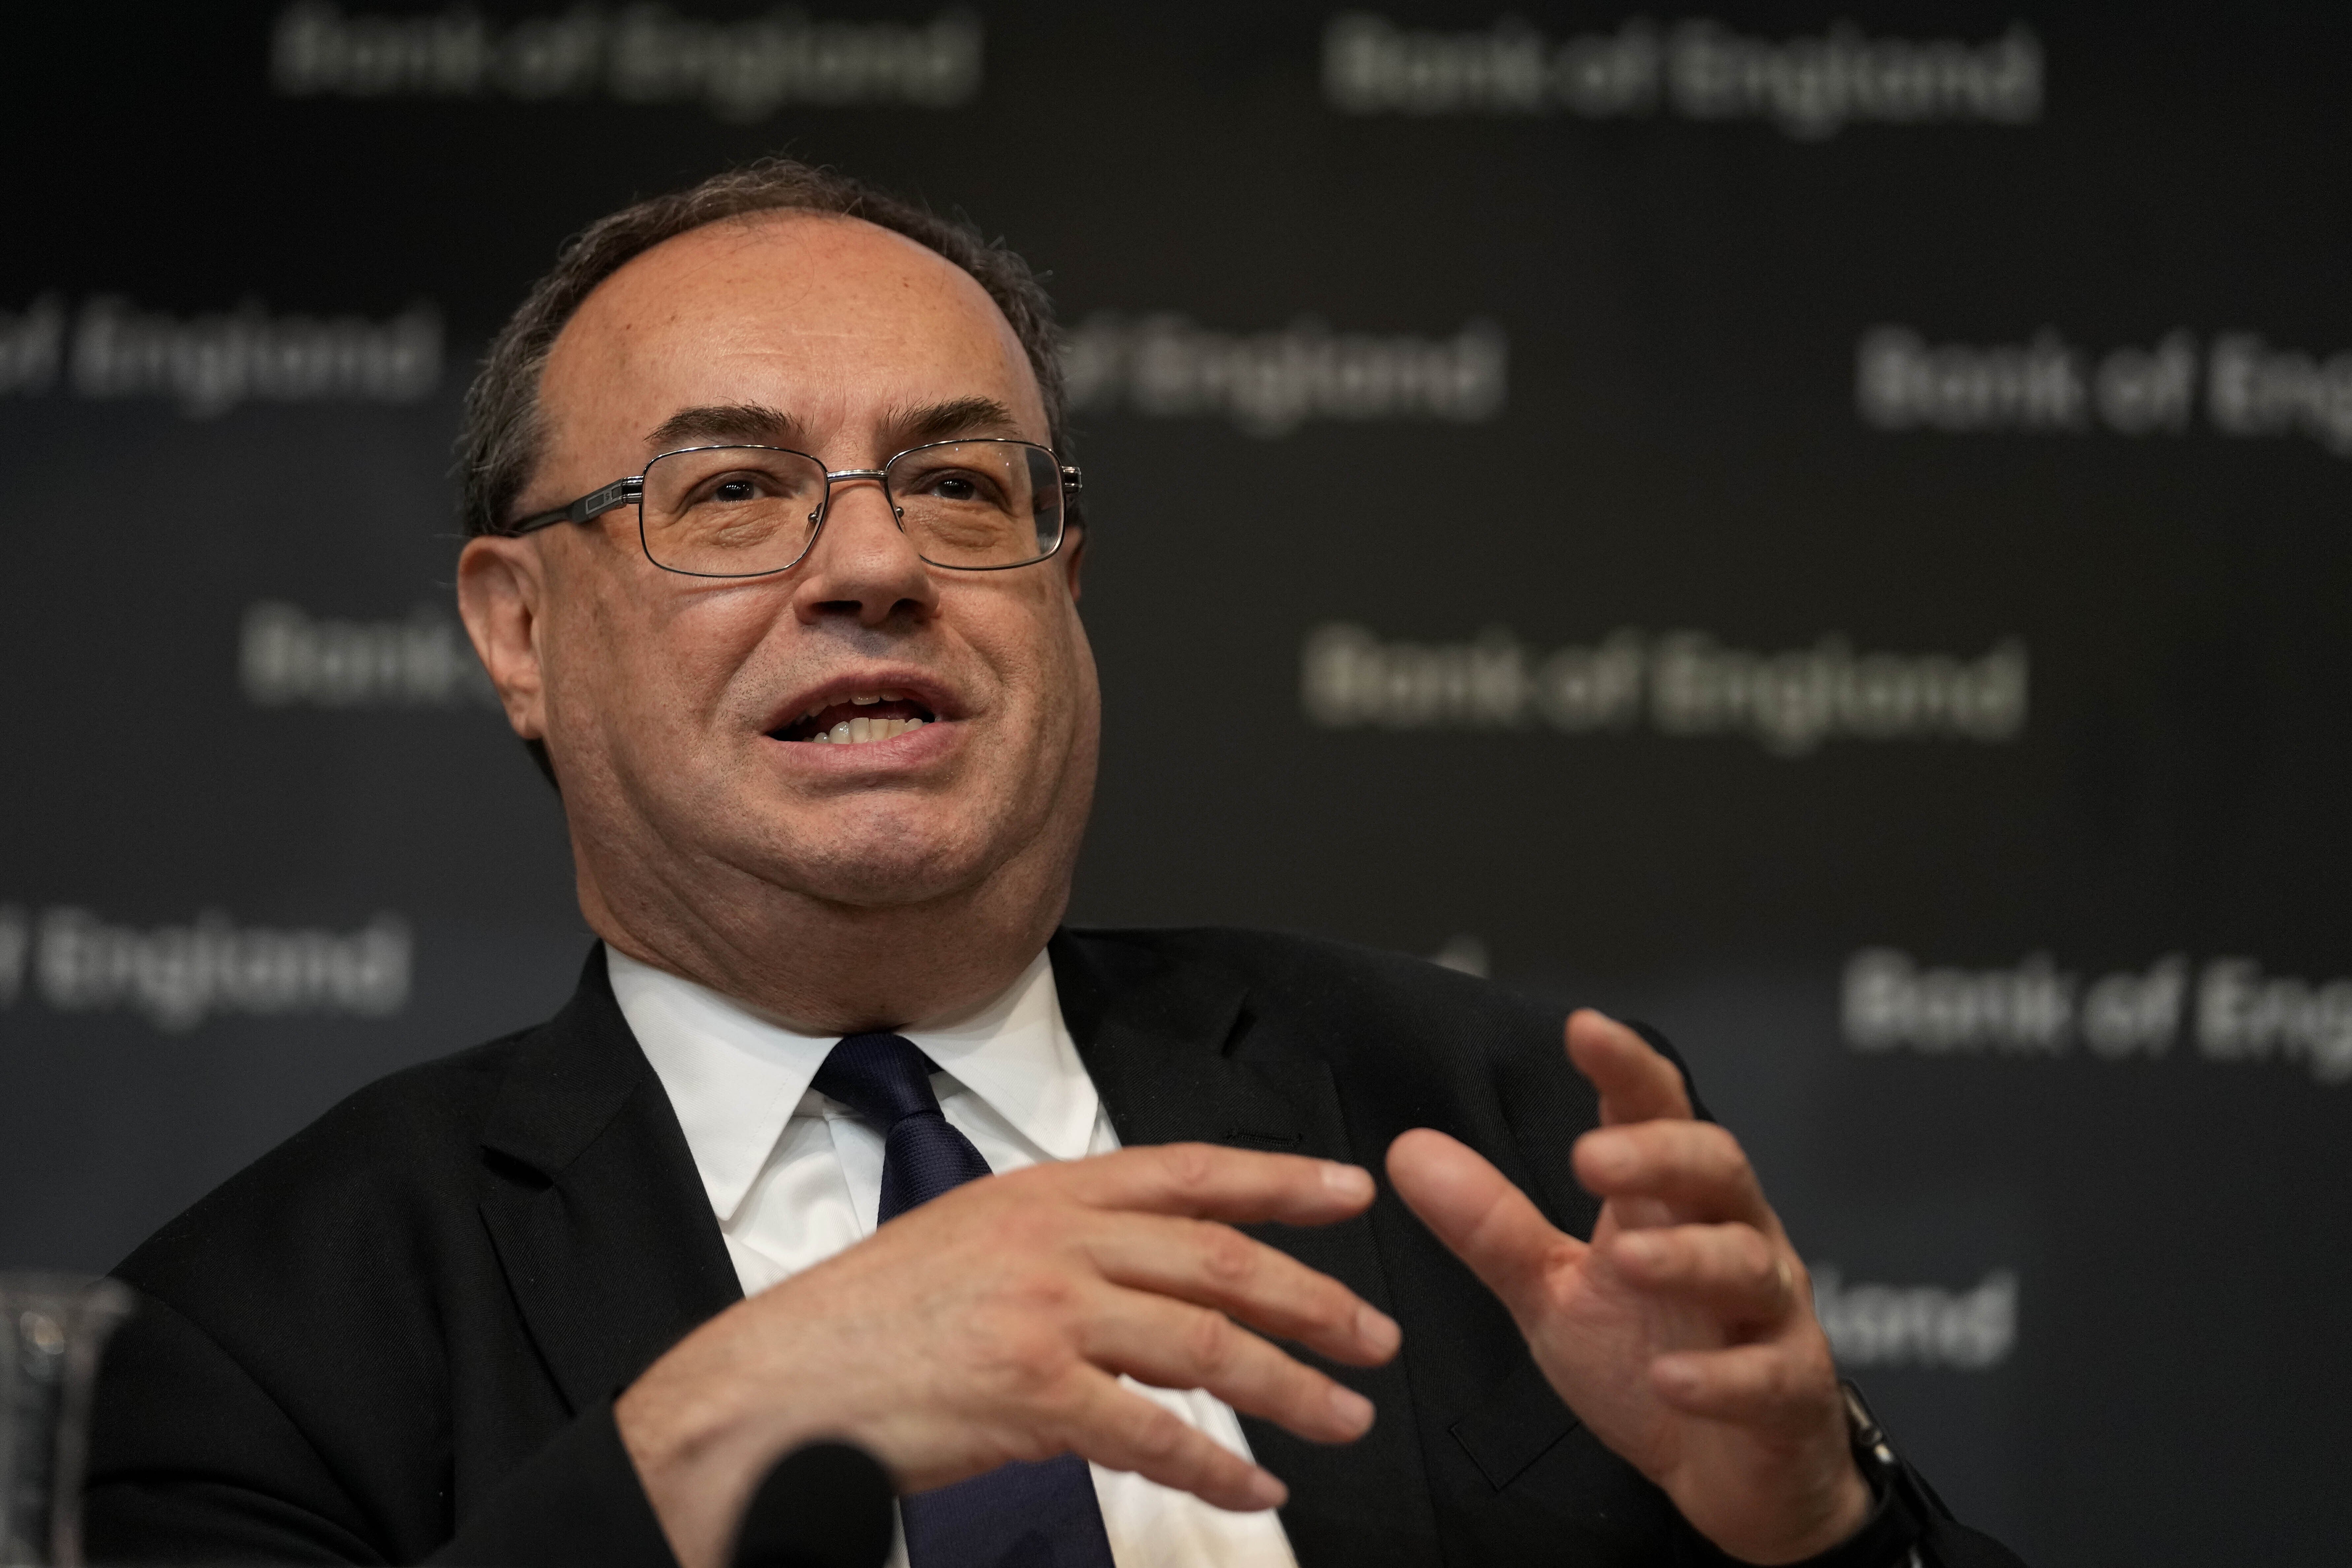 Bank of England Governor Andrew Bailey said inflation could hit 10% later this year (Frank Augstein/PA)